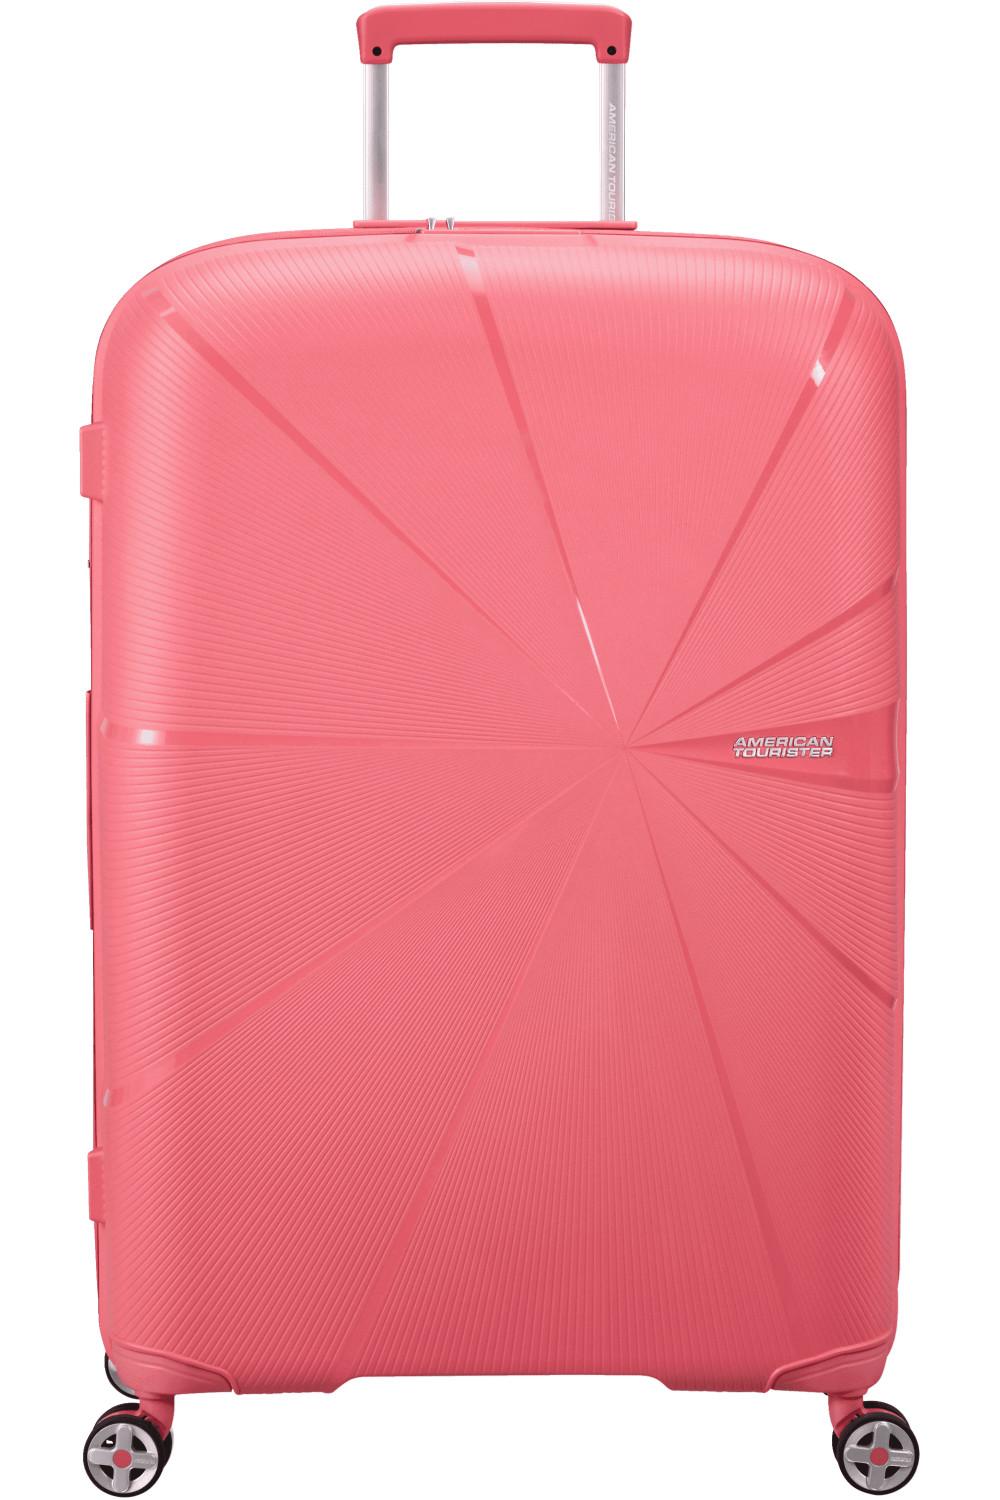 American Tourister Trolley Bag - Buy Trolley Bags Online in India